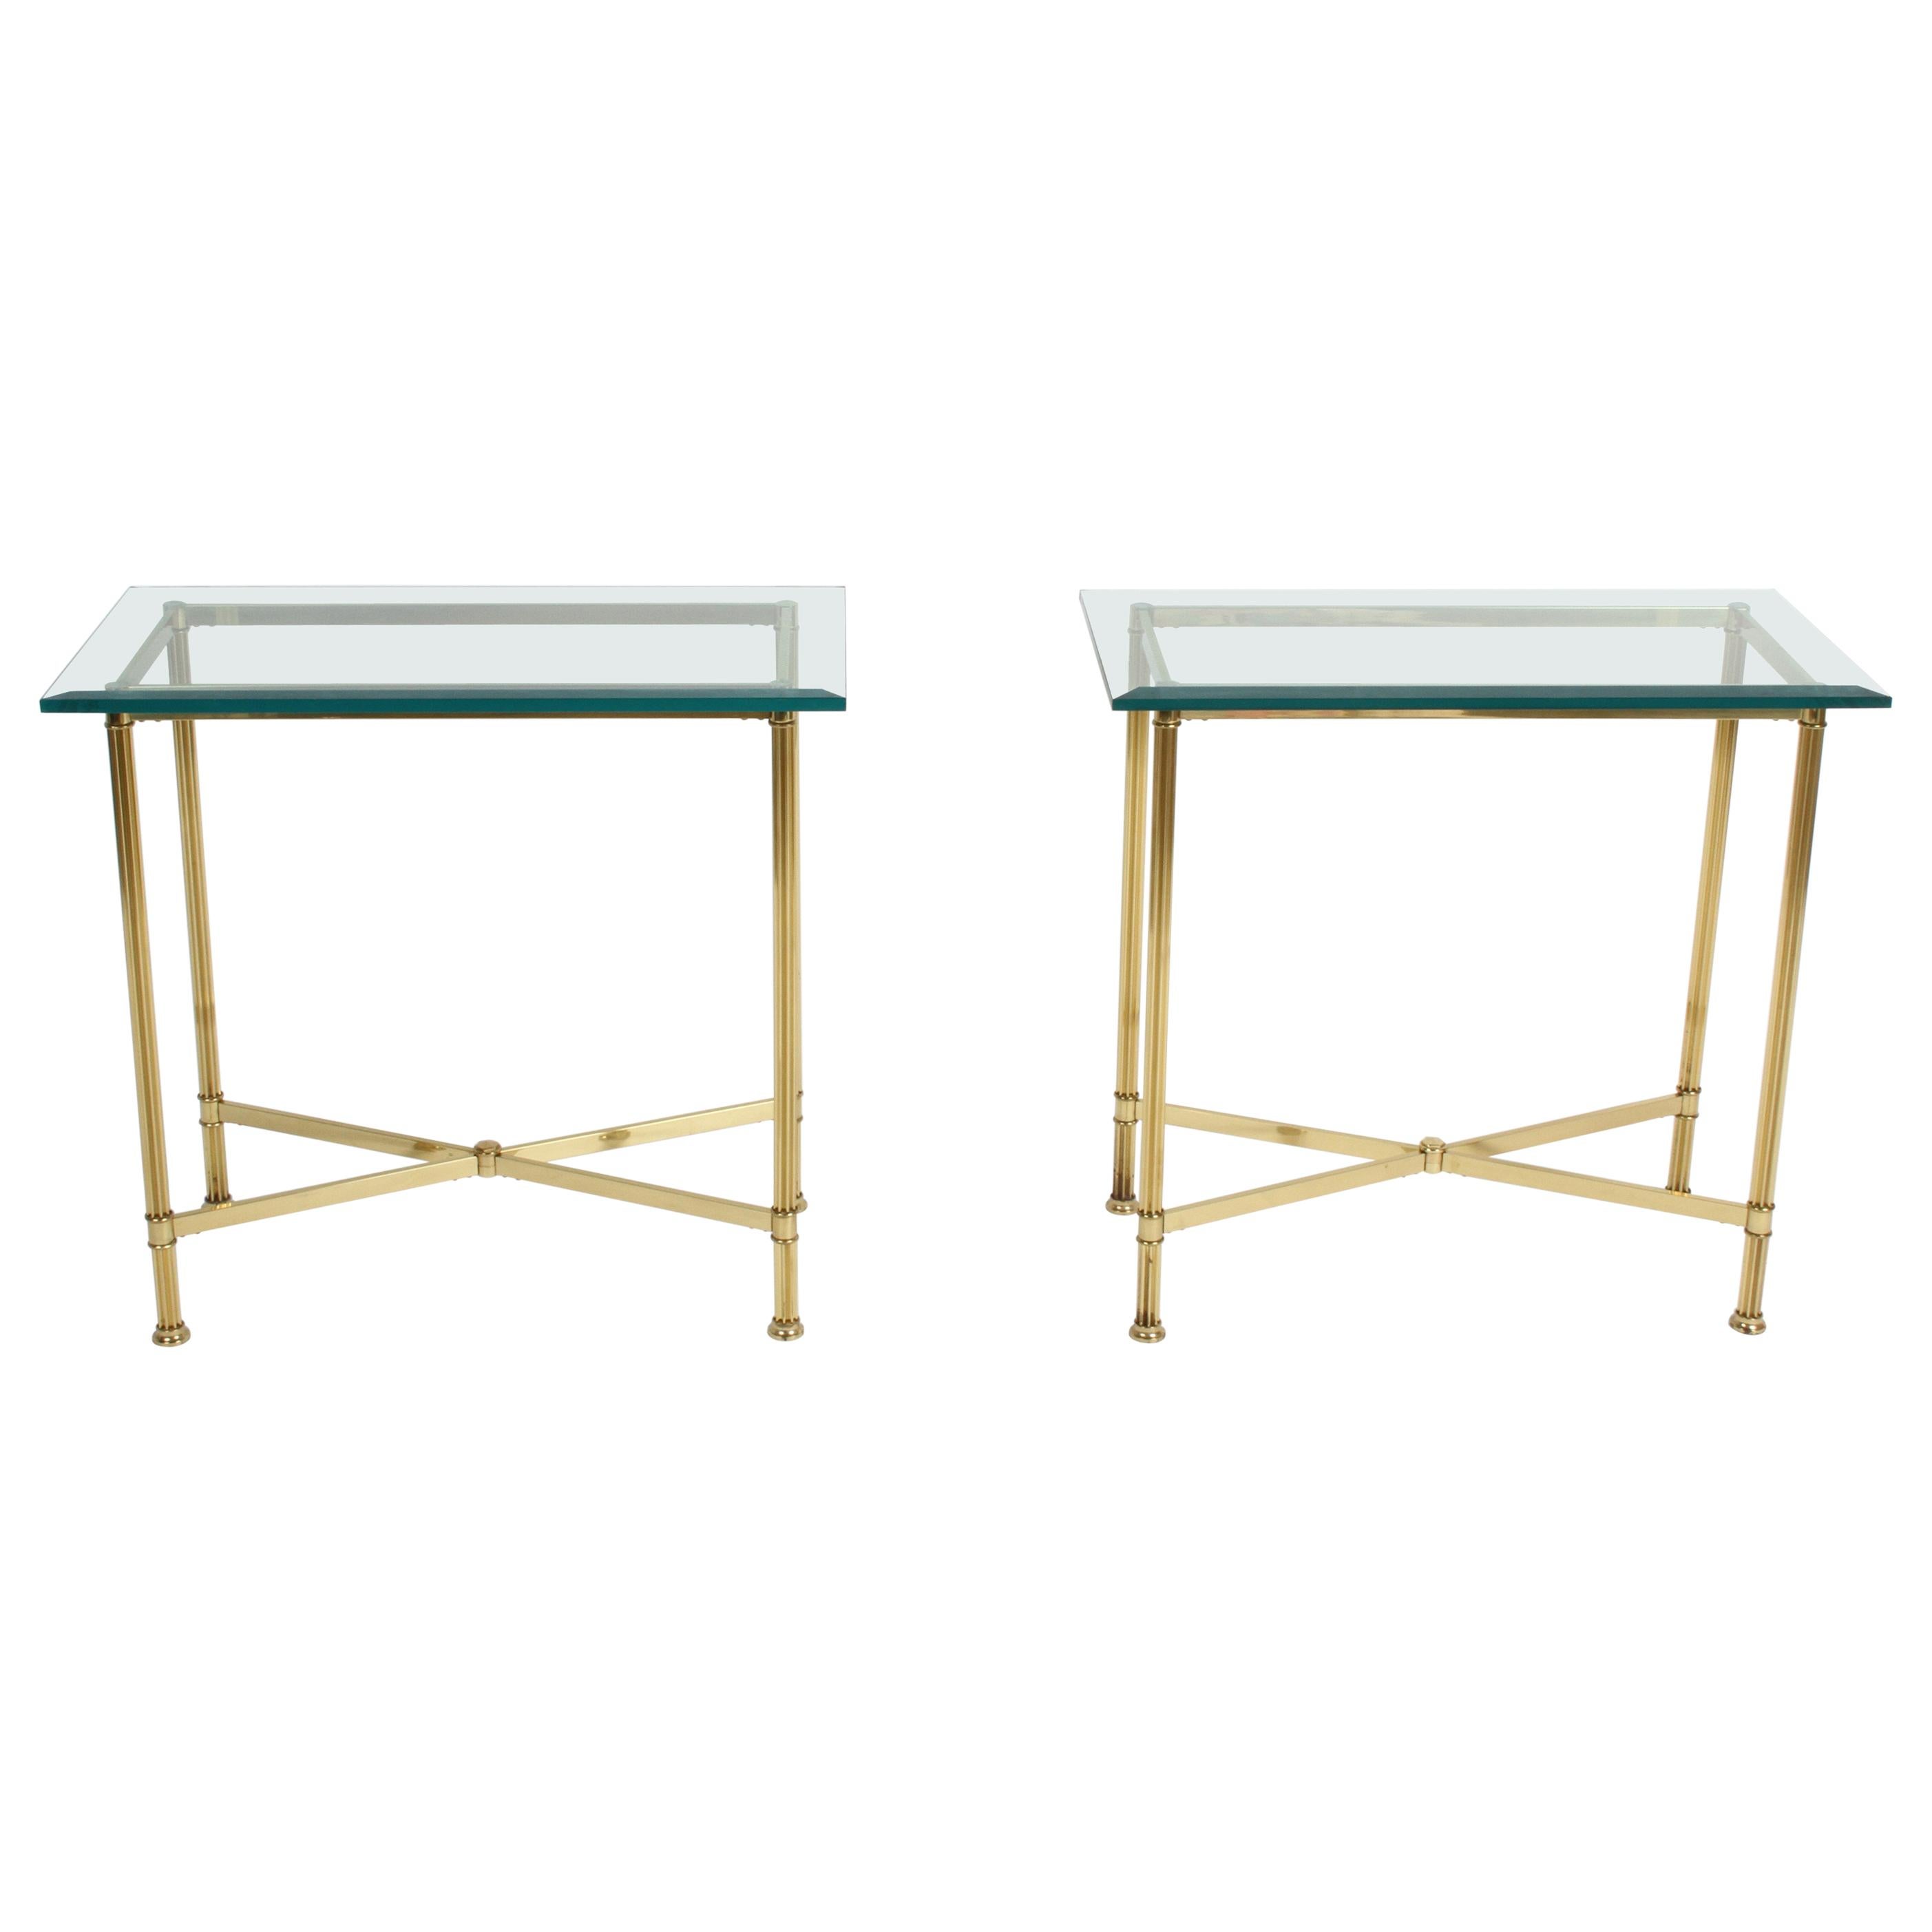 Pair of Mastercraft Hollywood Regency Fluted Brass and Glass Console Tables